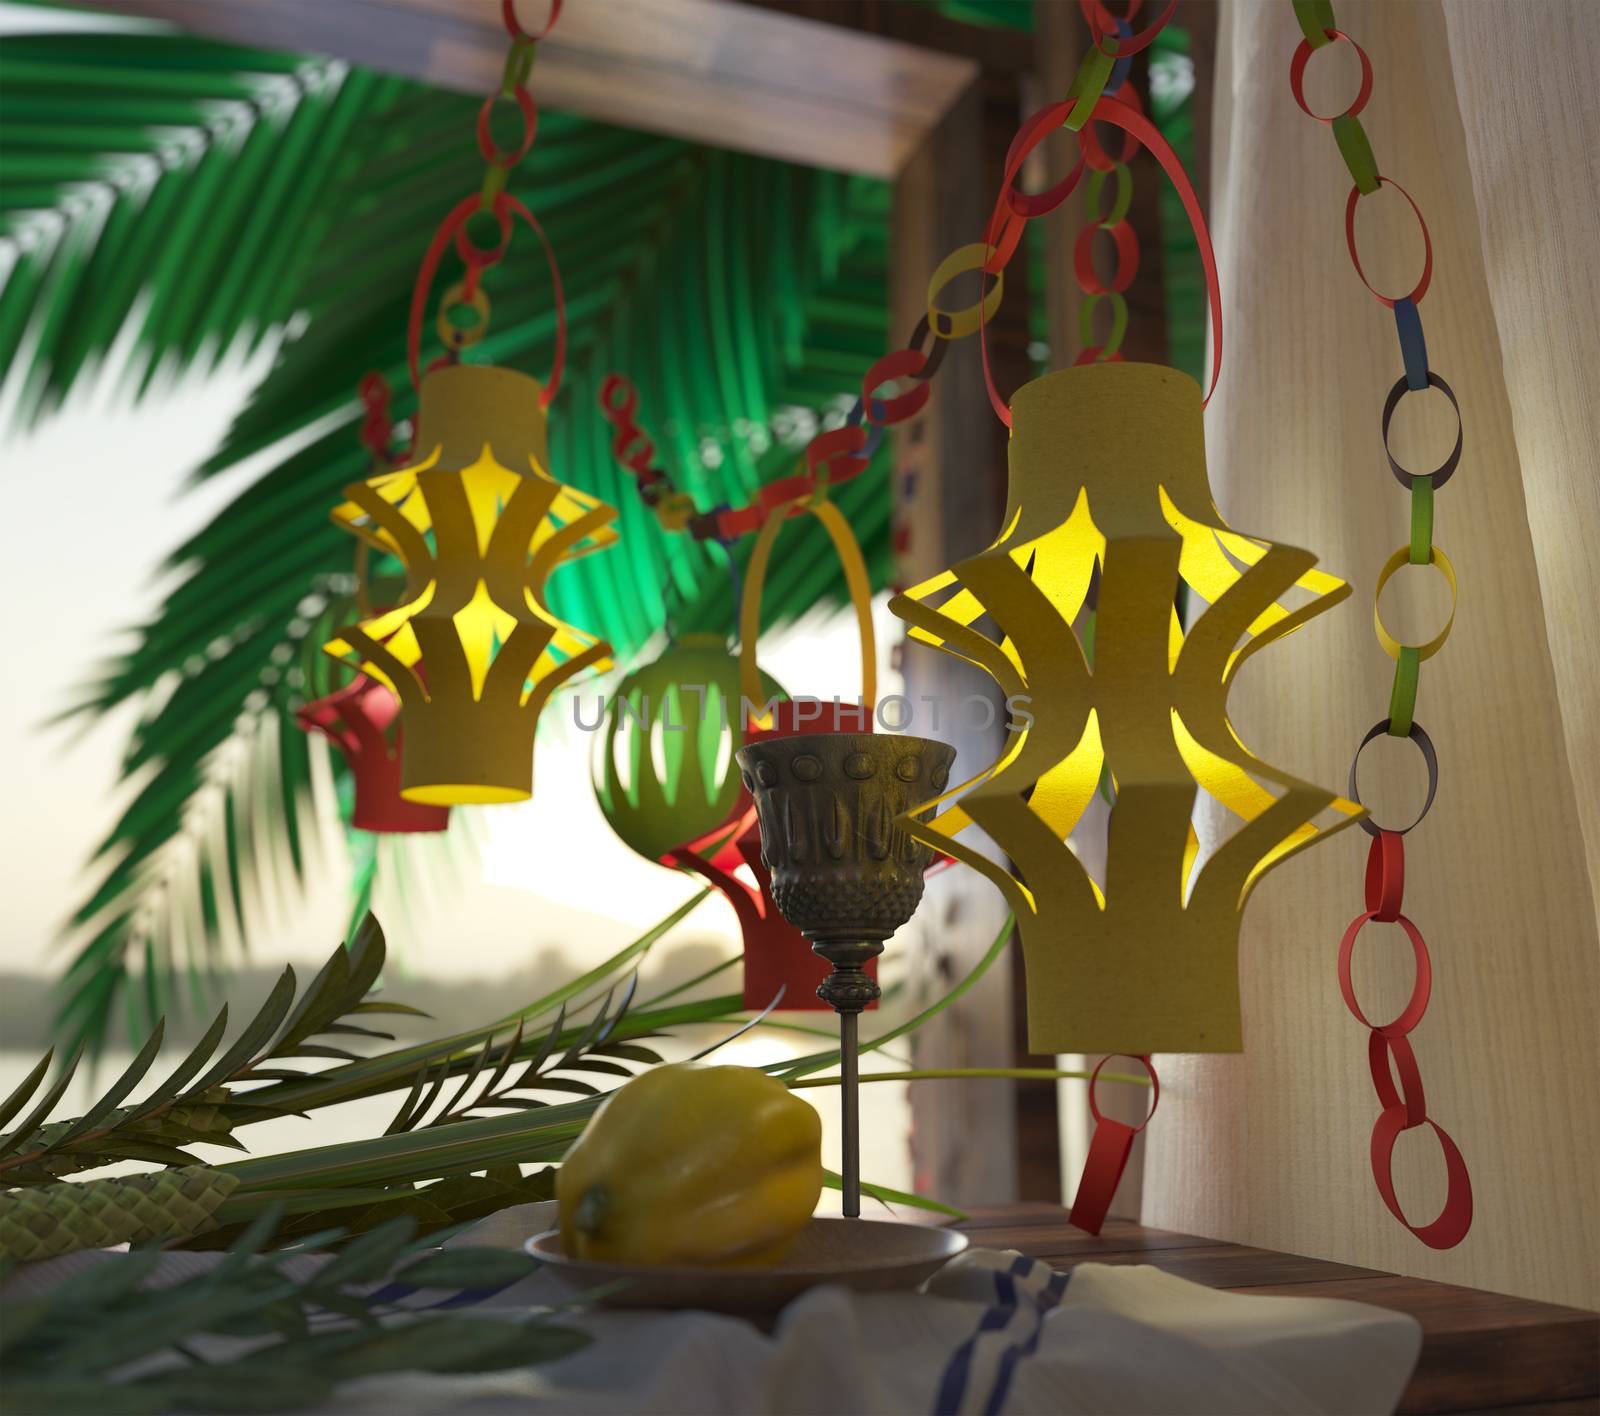 Symbols of the Jewish holiday Sukkot with palm leaves and glass wine 3D illustration